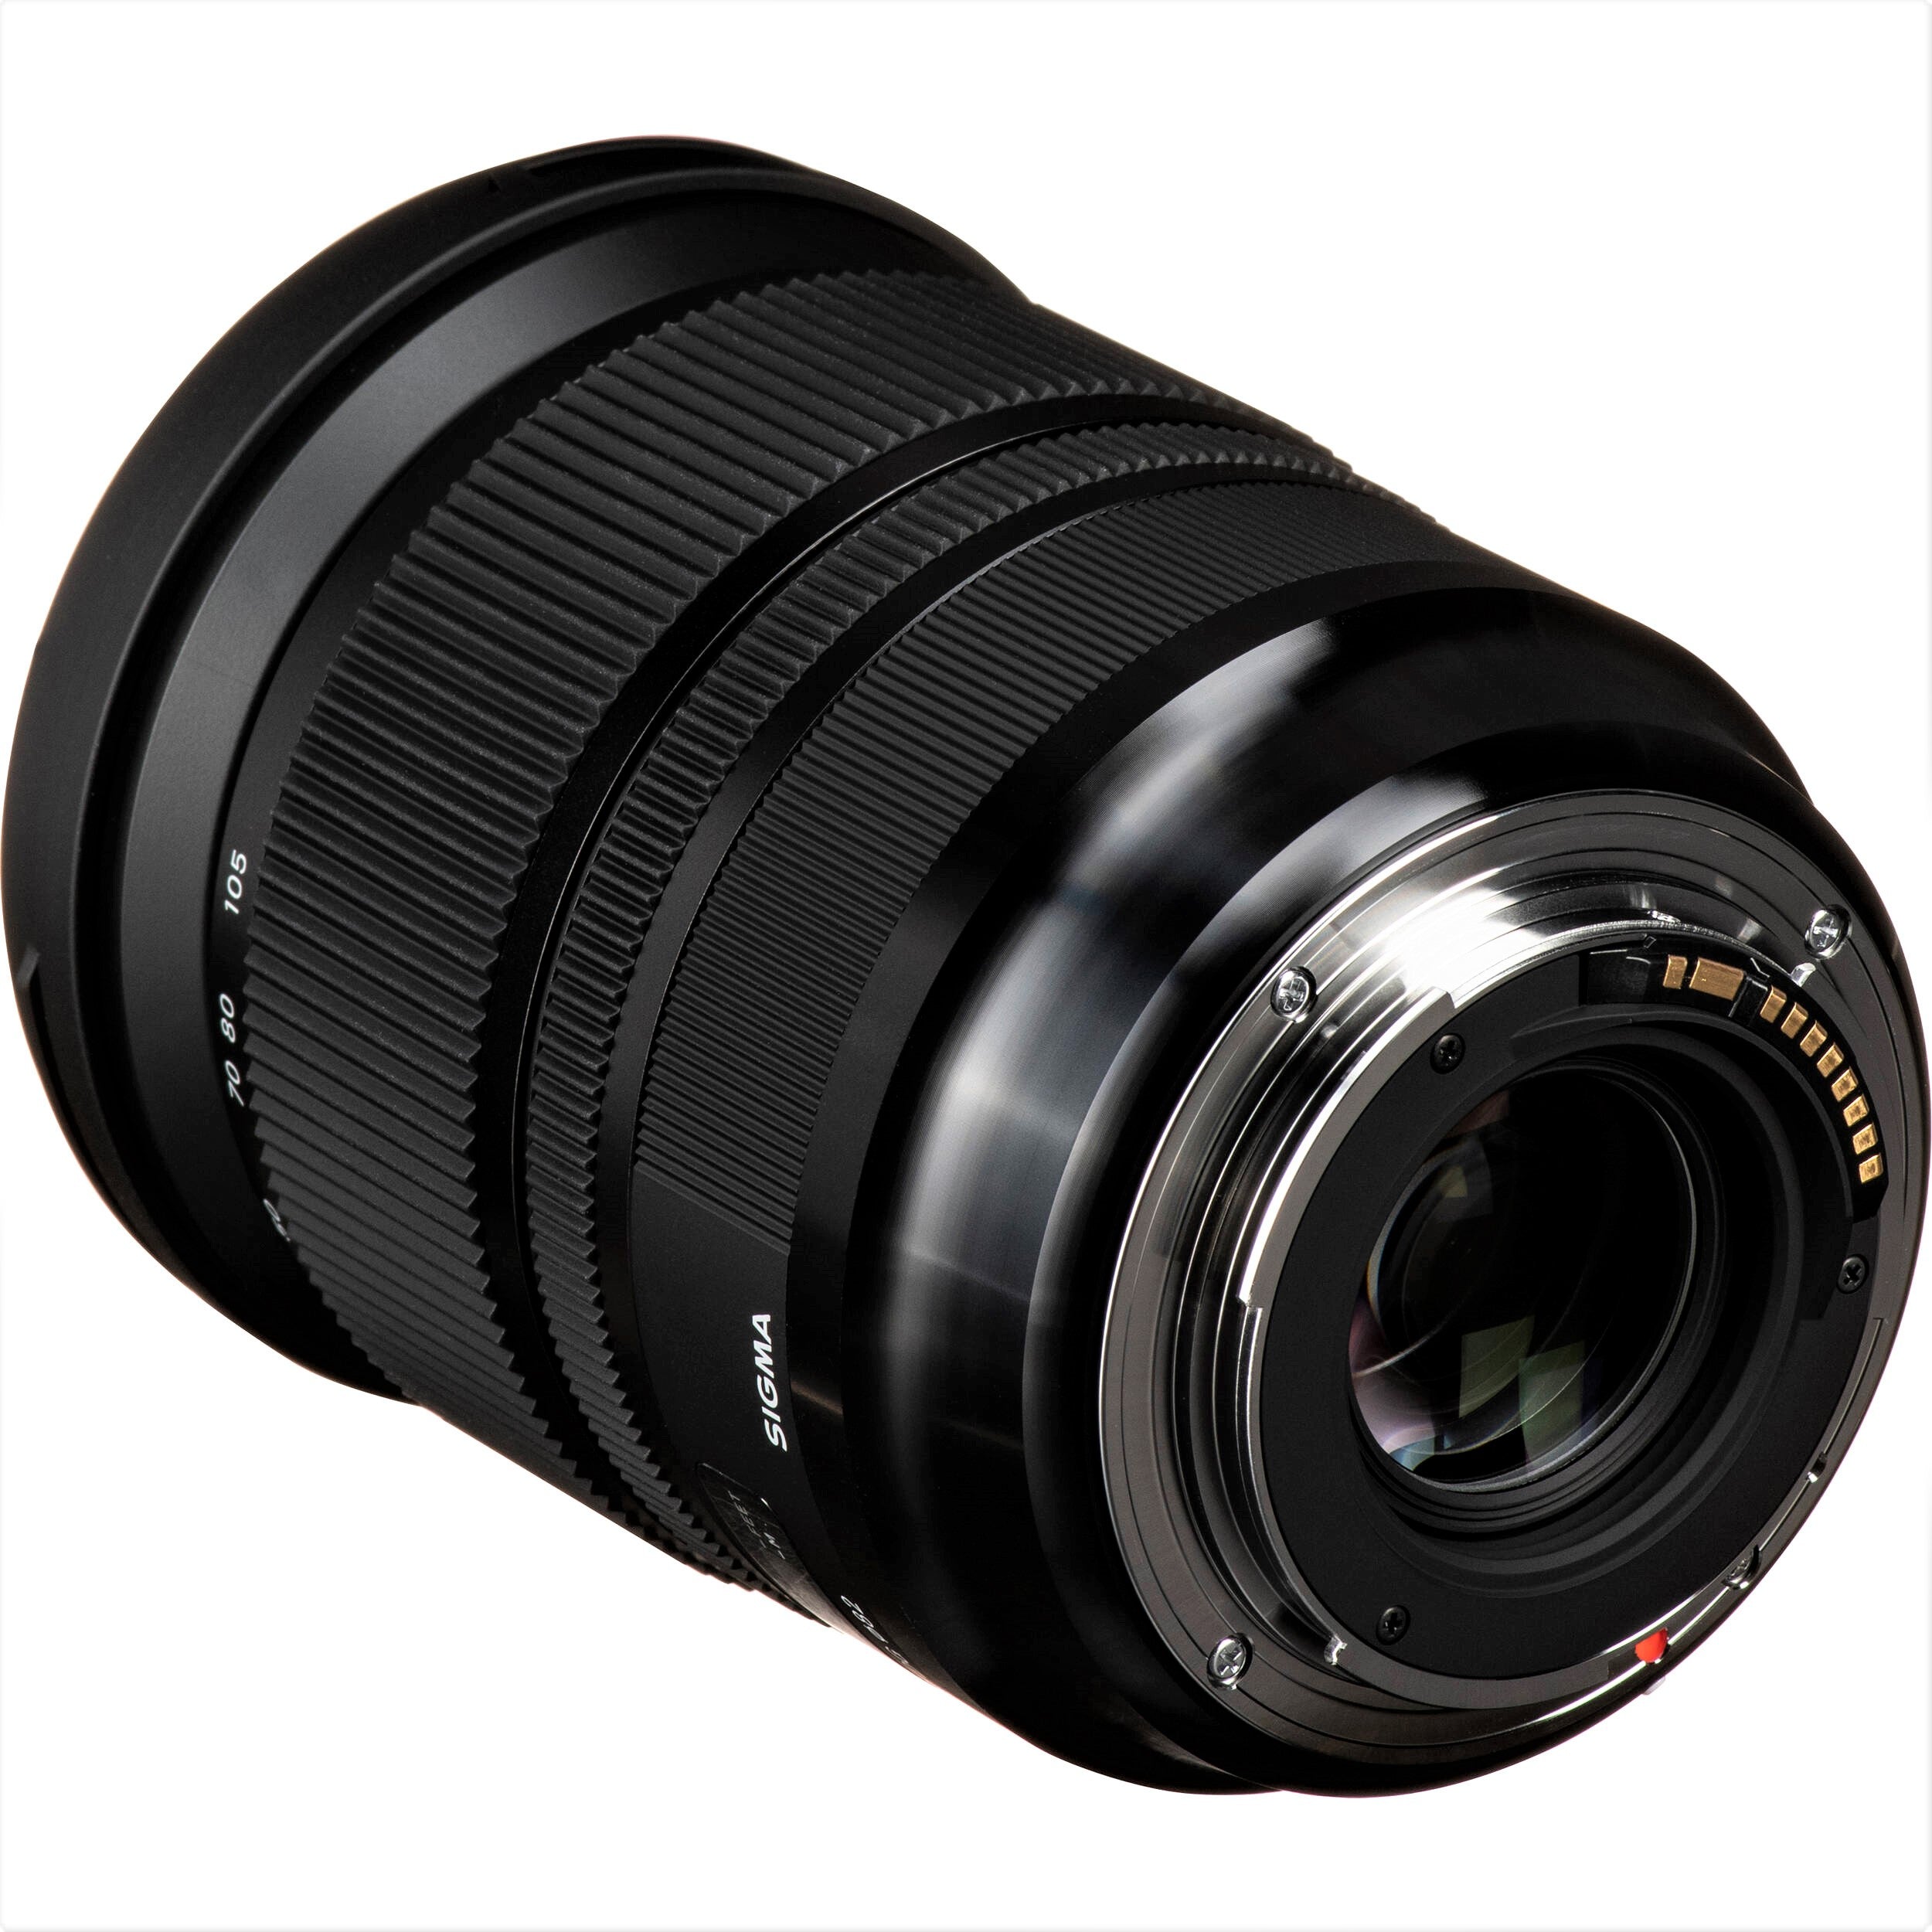 Sigma 24-105mm F4.0 DG OS HSM Art Lens (Sigma SA) in a Back-Side View